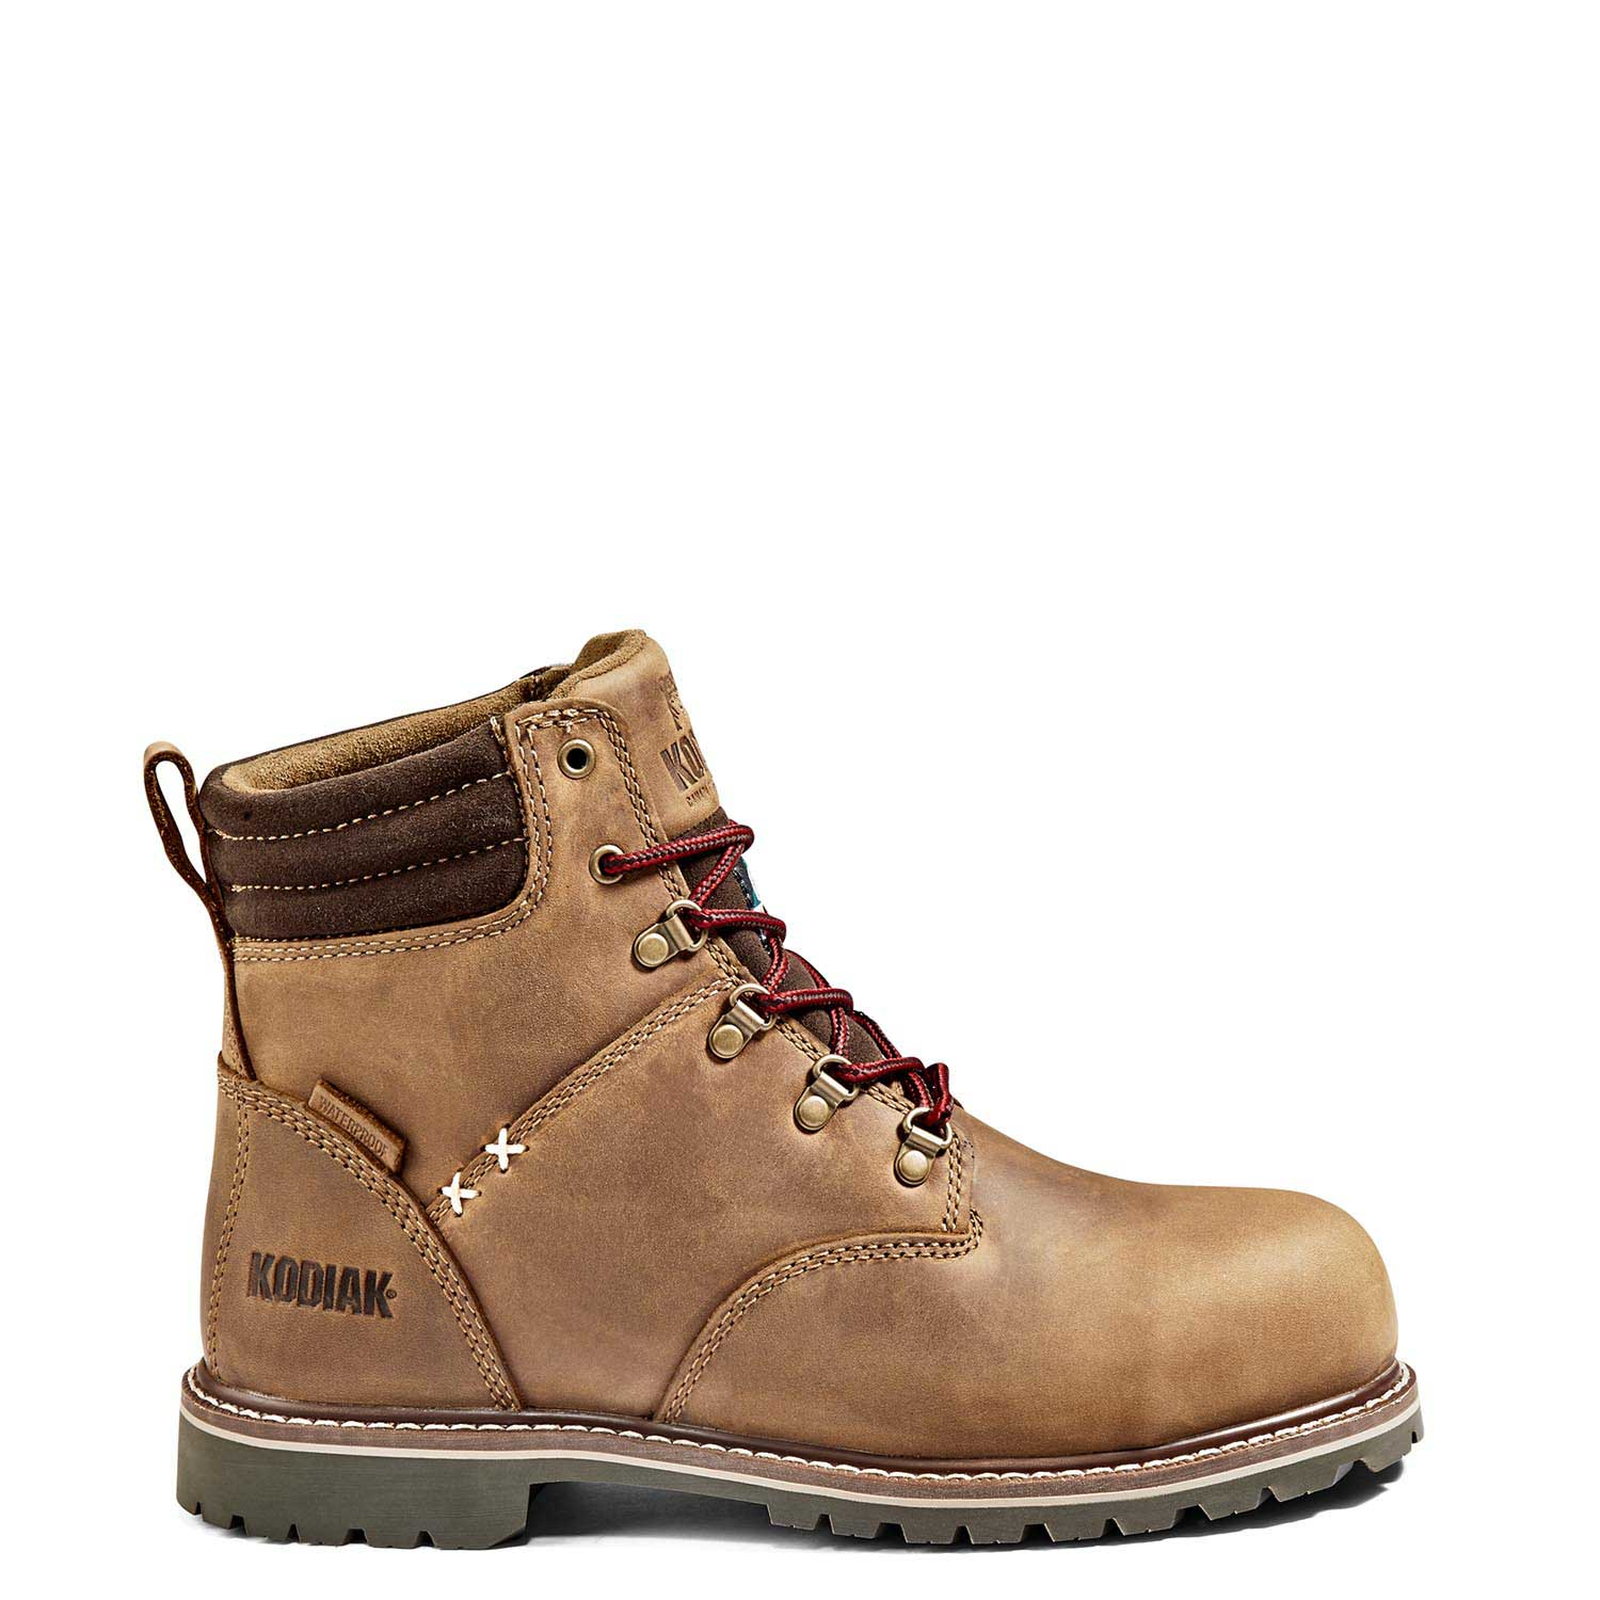 Kodiak Women's Bralorne 6 Inch Waterproof Work Boots with Composite Toe from Columbia Safety